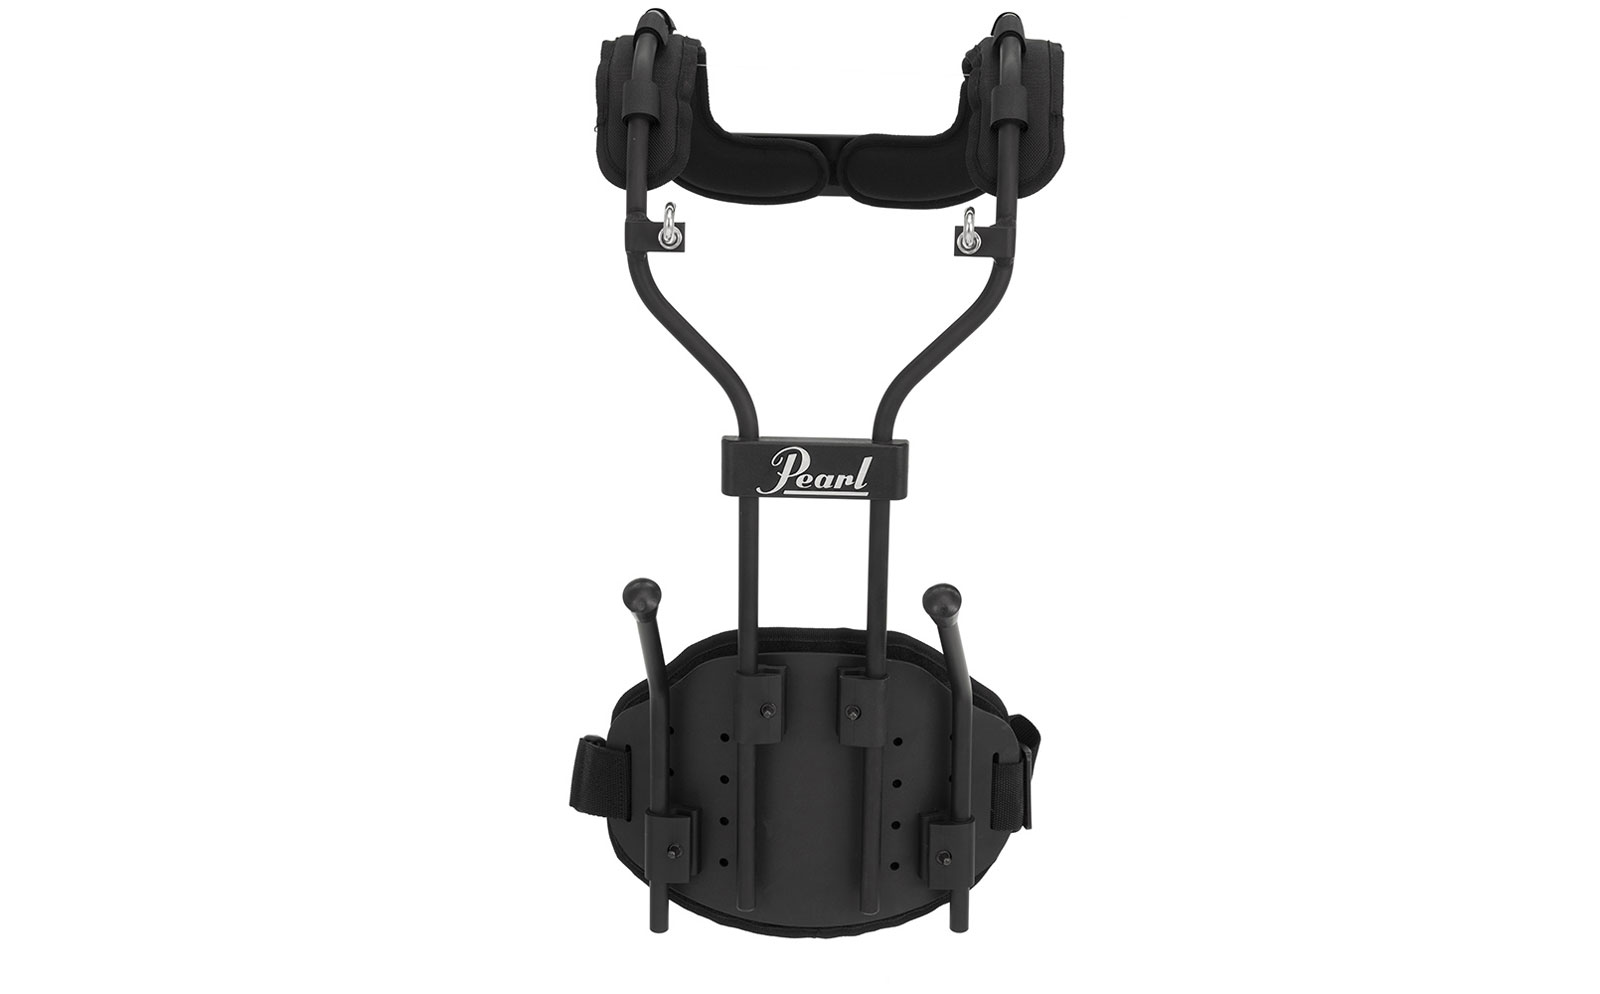 PEARL DRUMS CHAMPIONSHIP AIR FRAME 2 HARNESS